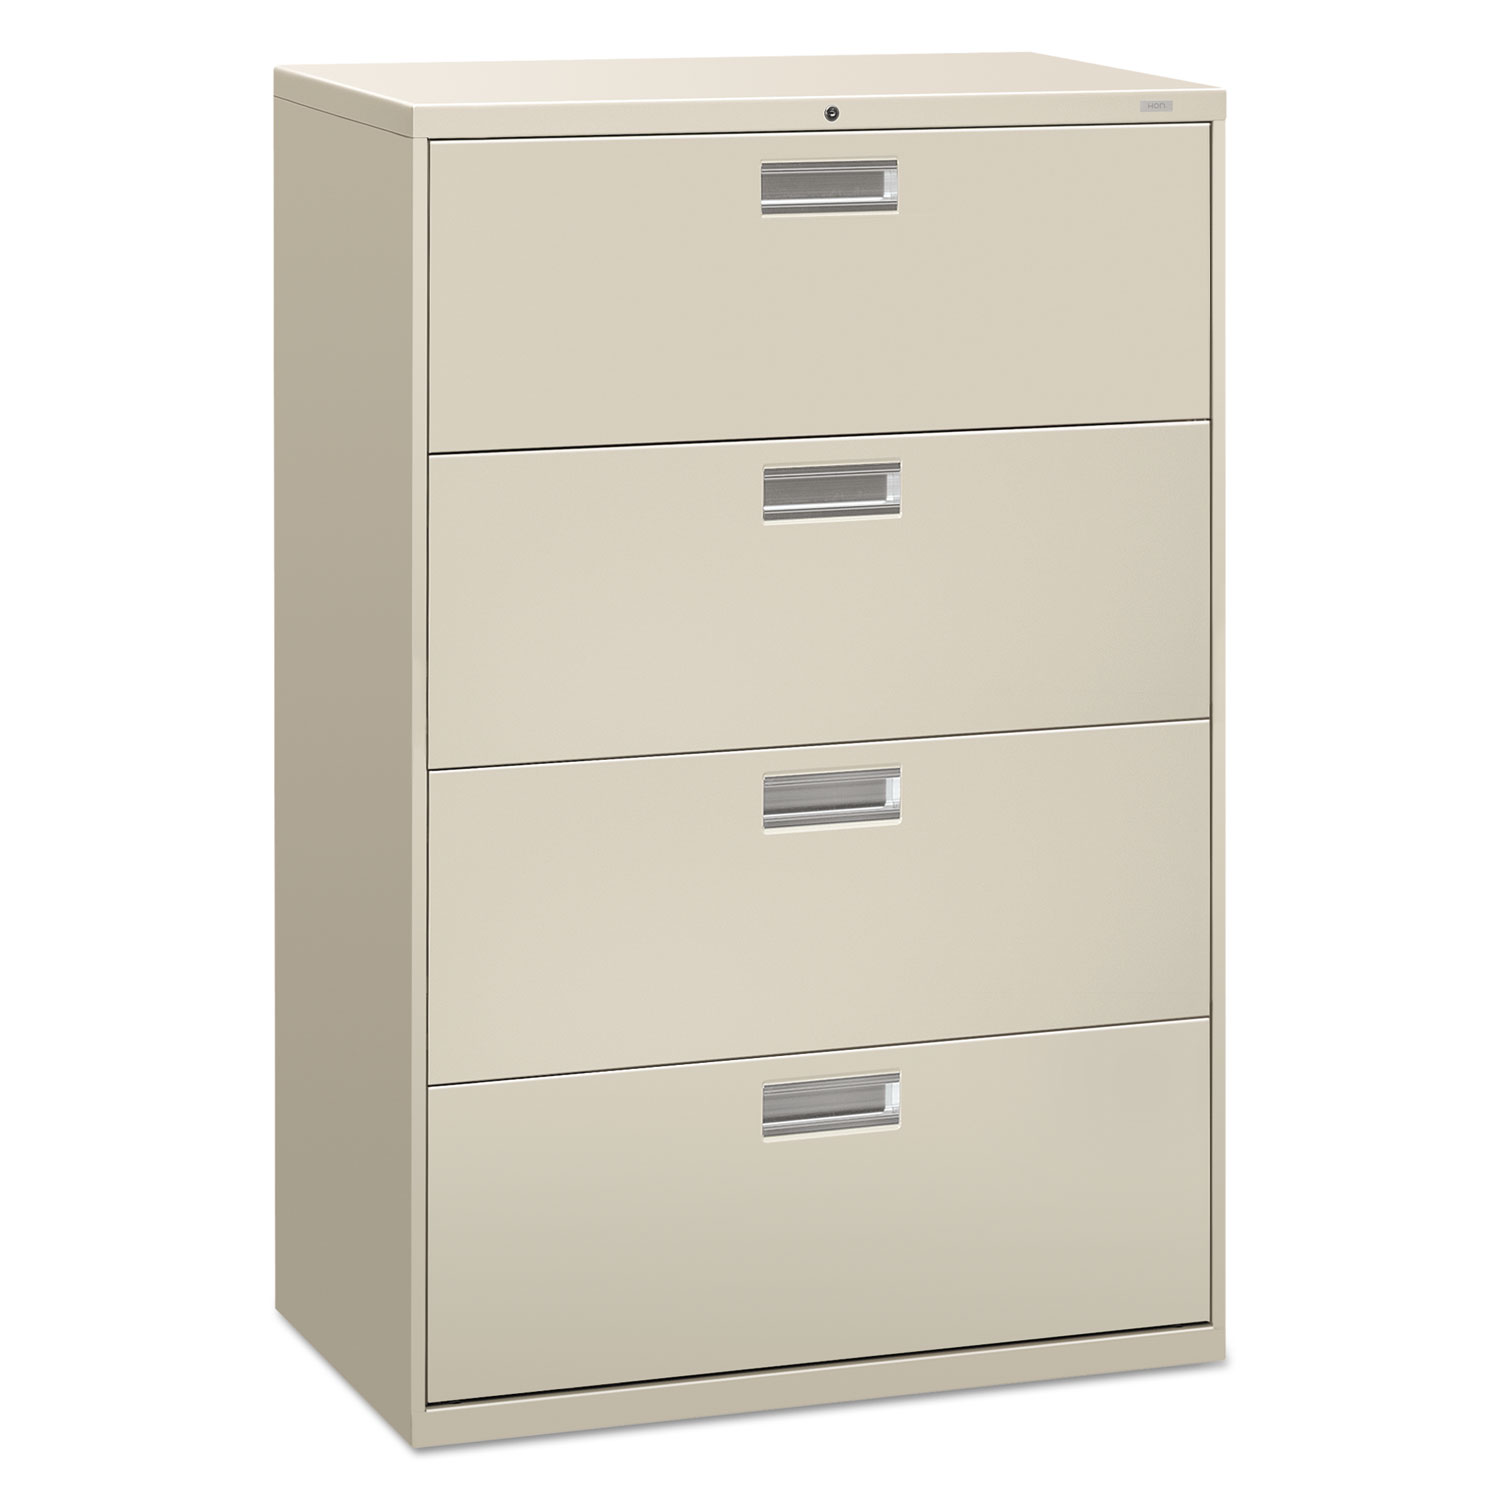 HON 600 Series Four-Drawer Lateral File, 36w x 19-1/4d, Light Gray